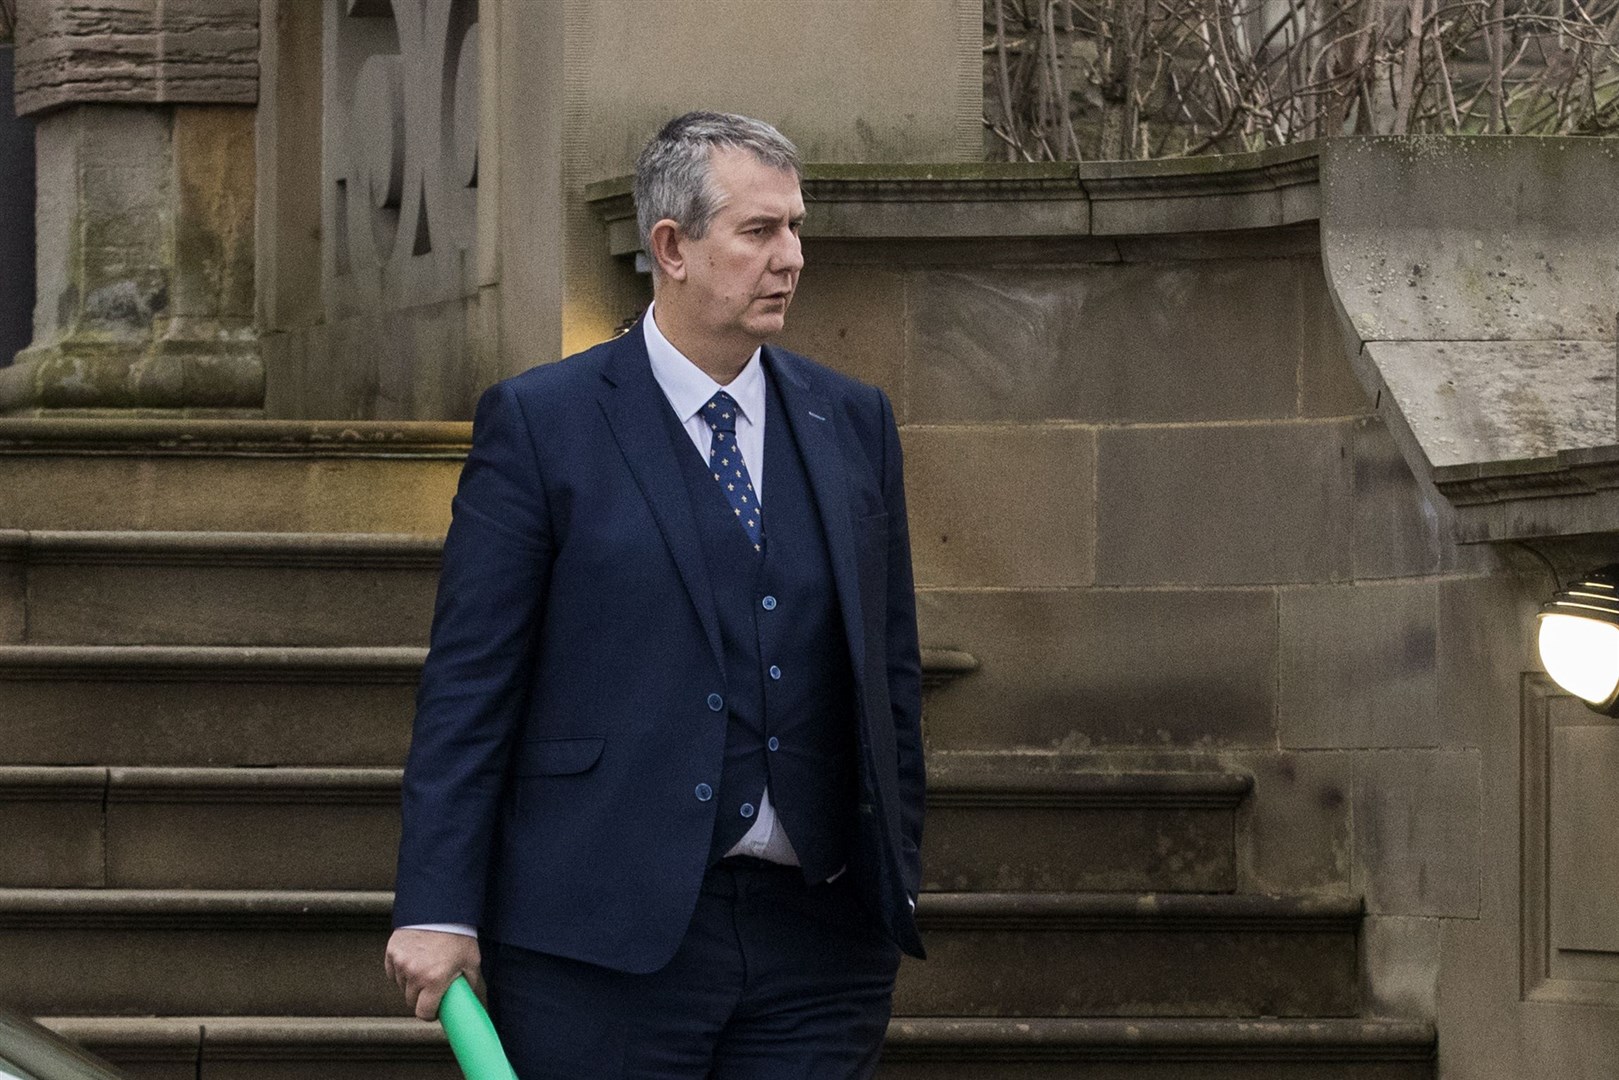 Edwin Poots said his comments were not sectarian and instead a political statement about Sinn Fein’s leadership (Liam McBurney/PA)